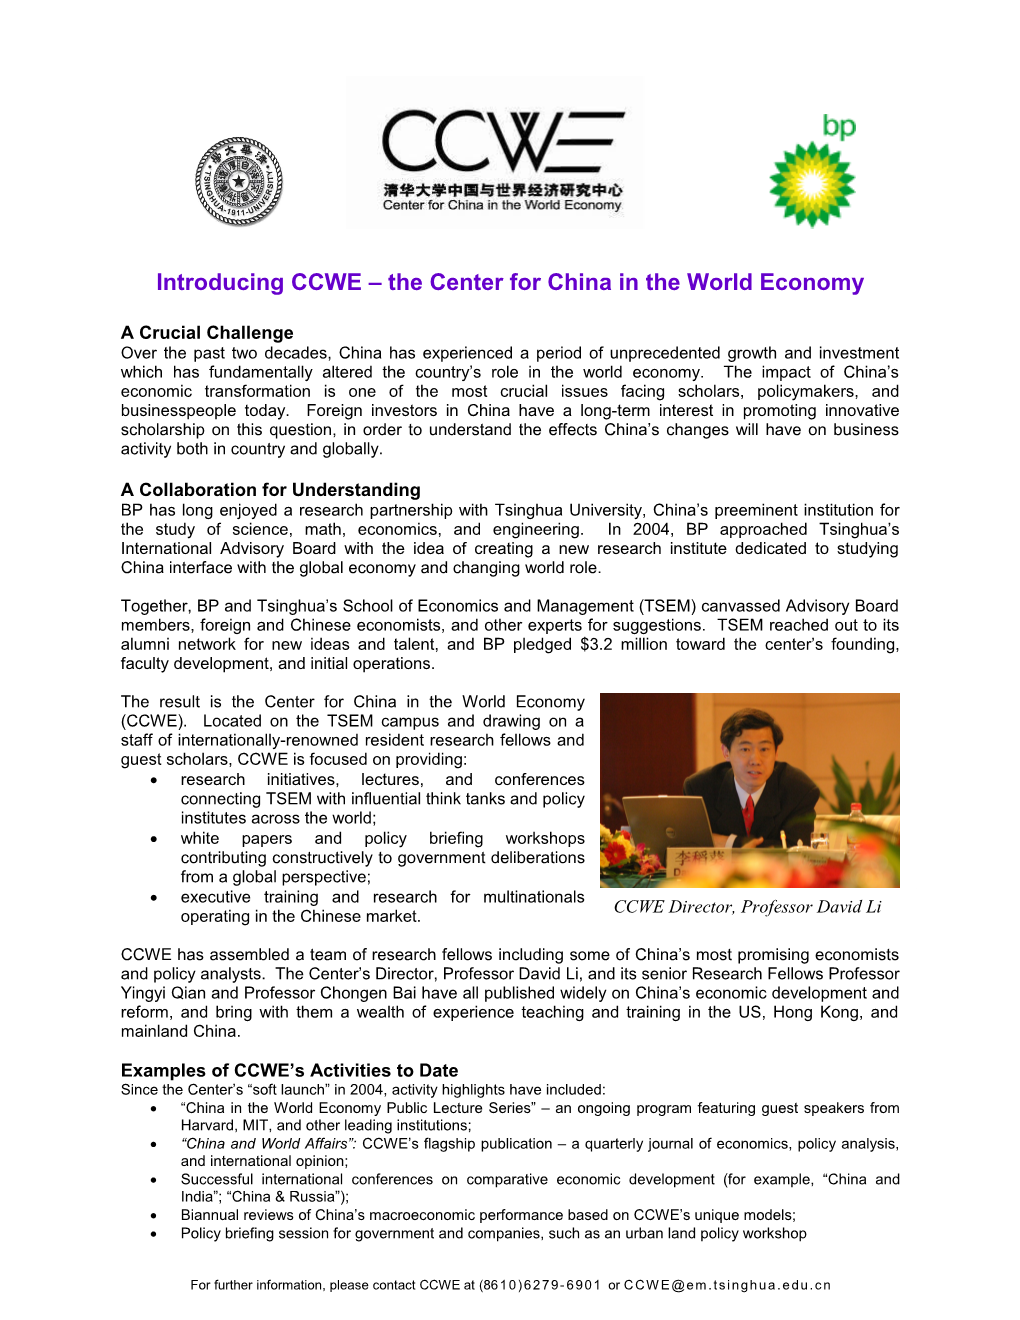 Introducing CCWE the Center for China in the World Economy